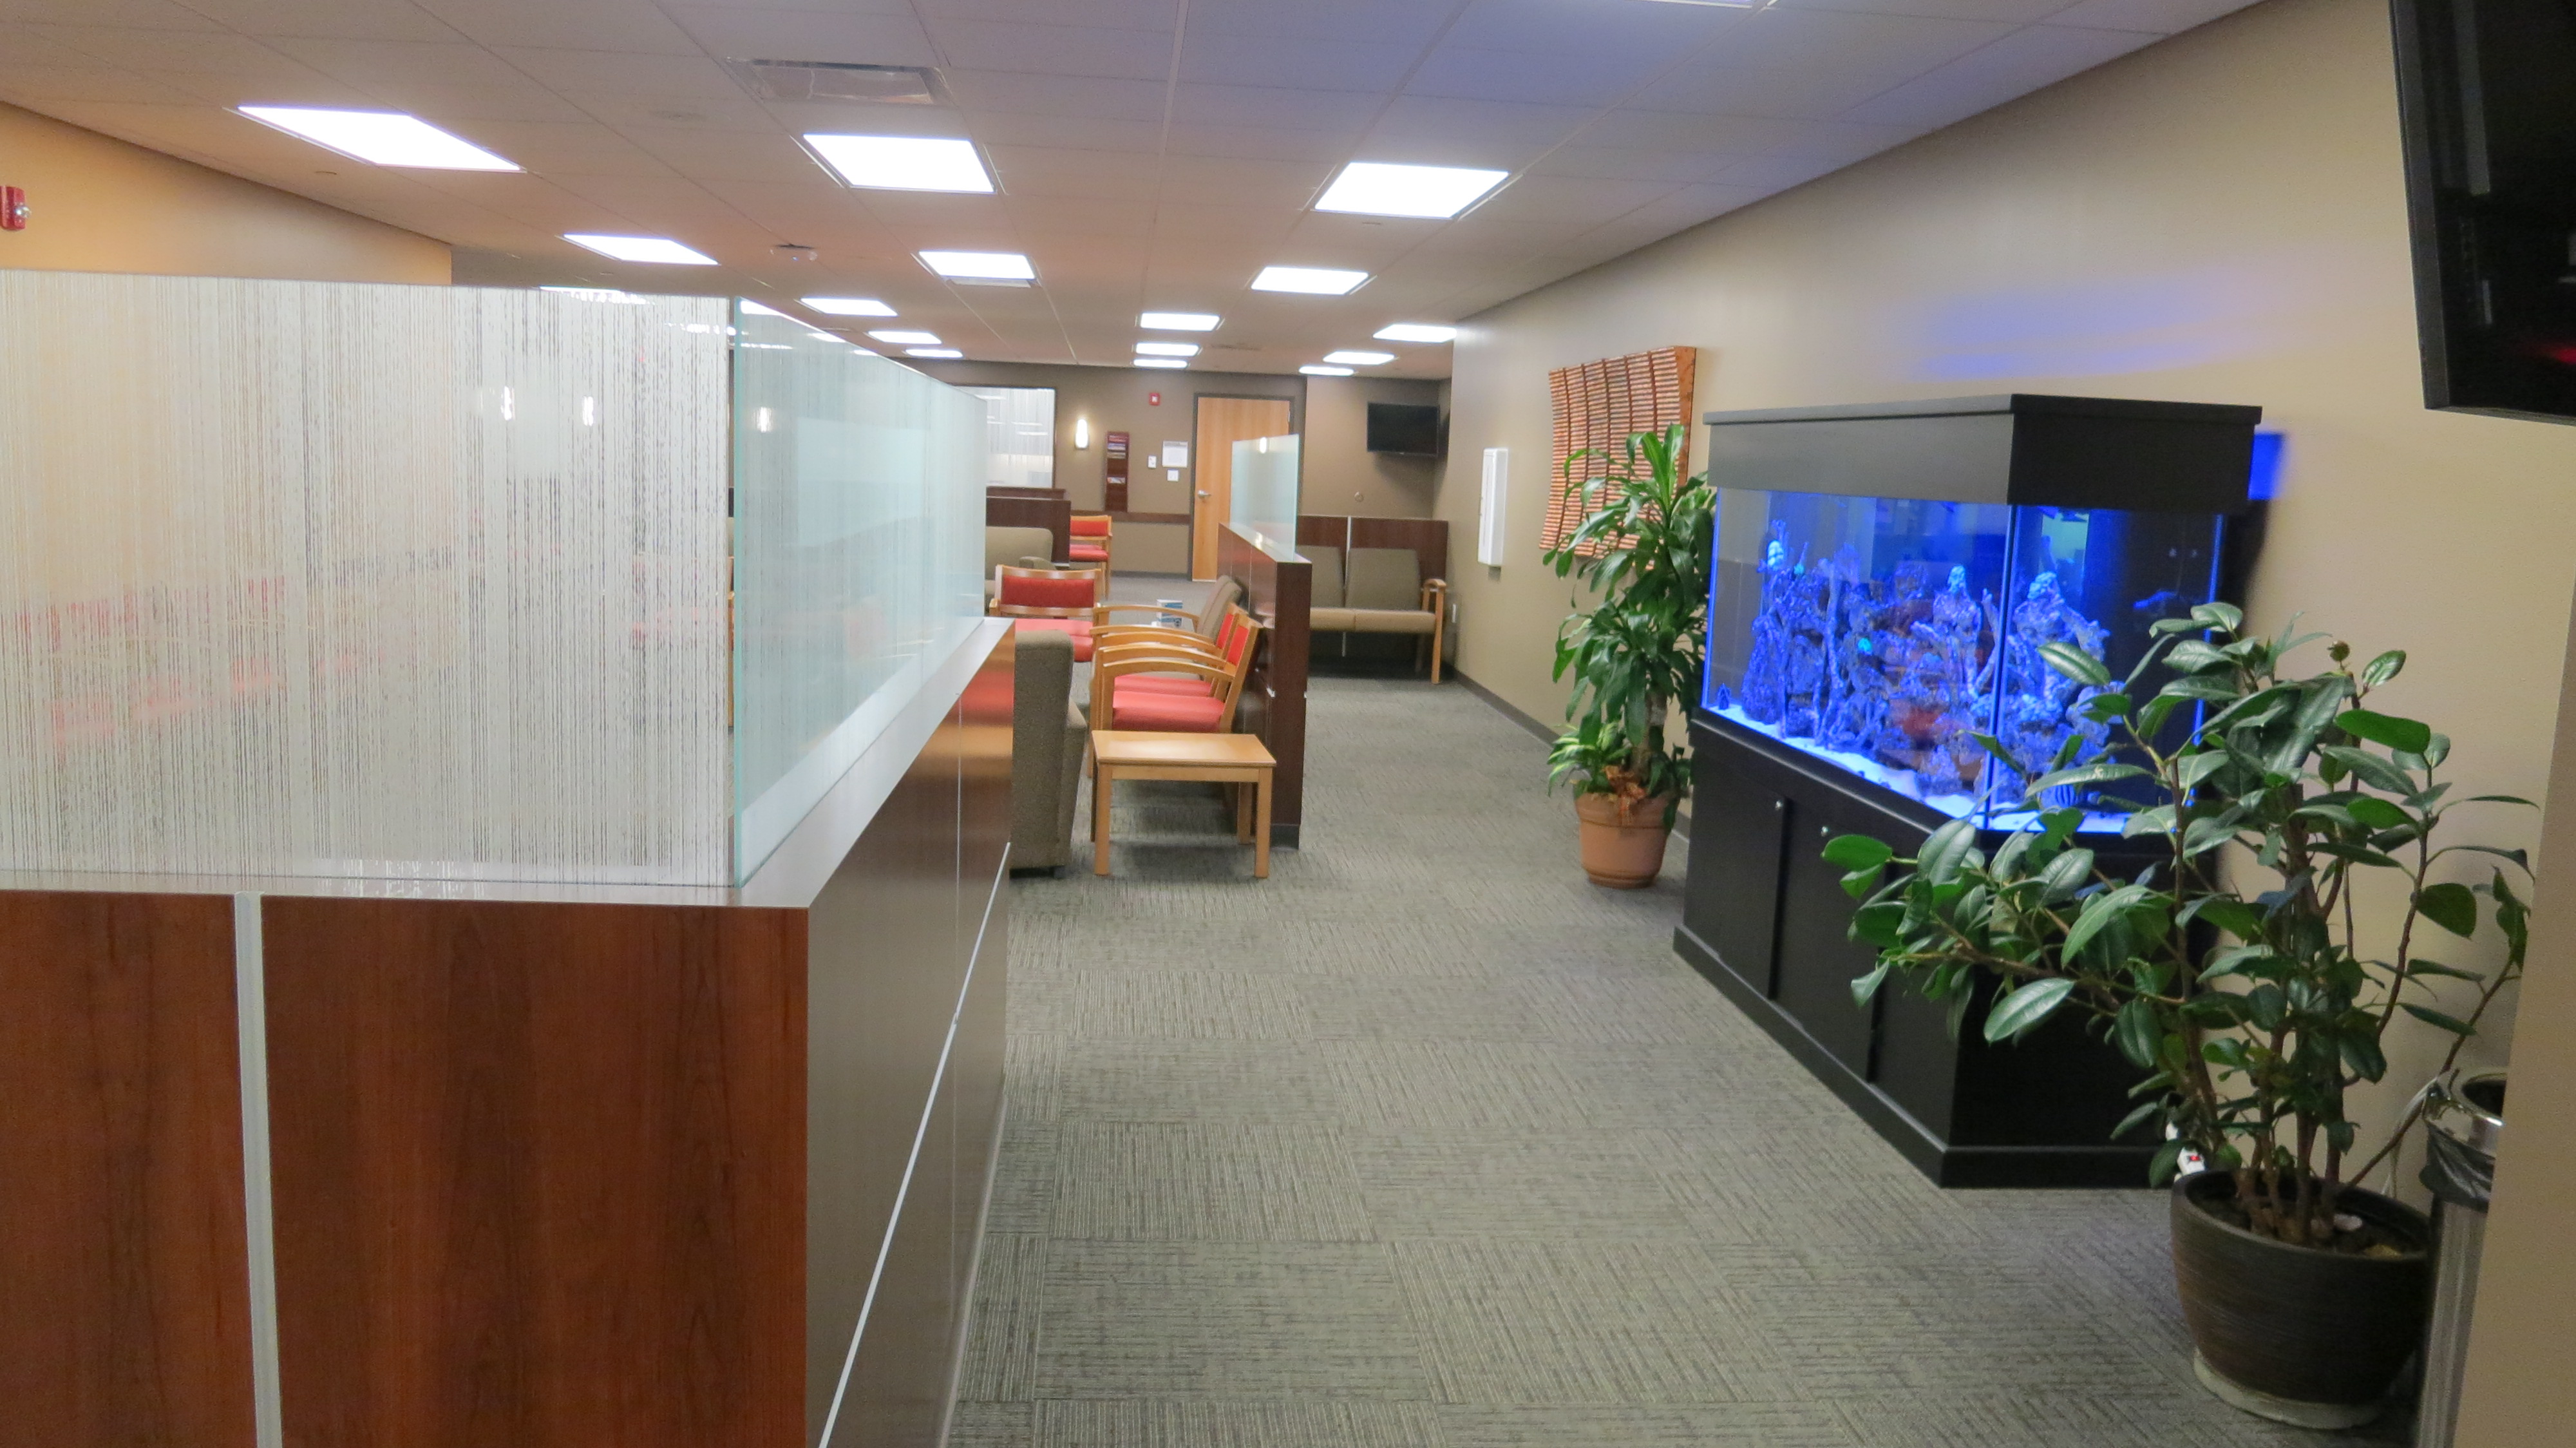 Boonslick Medical Group Reception area 2